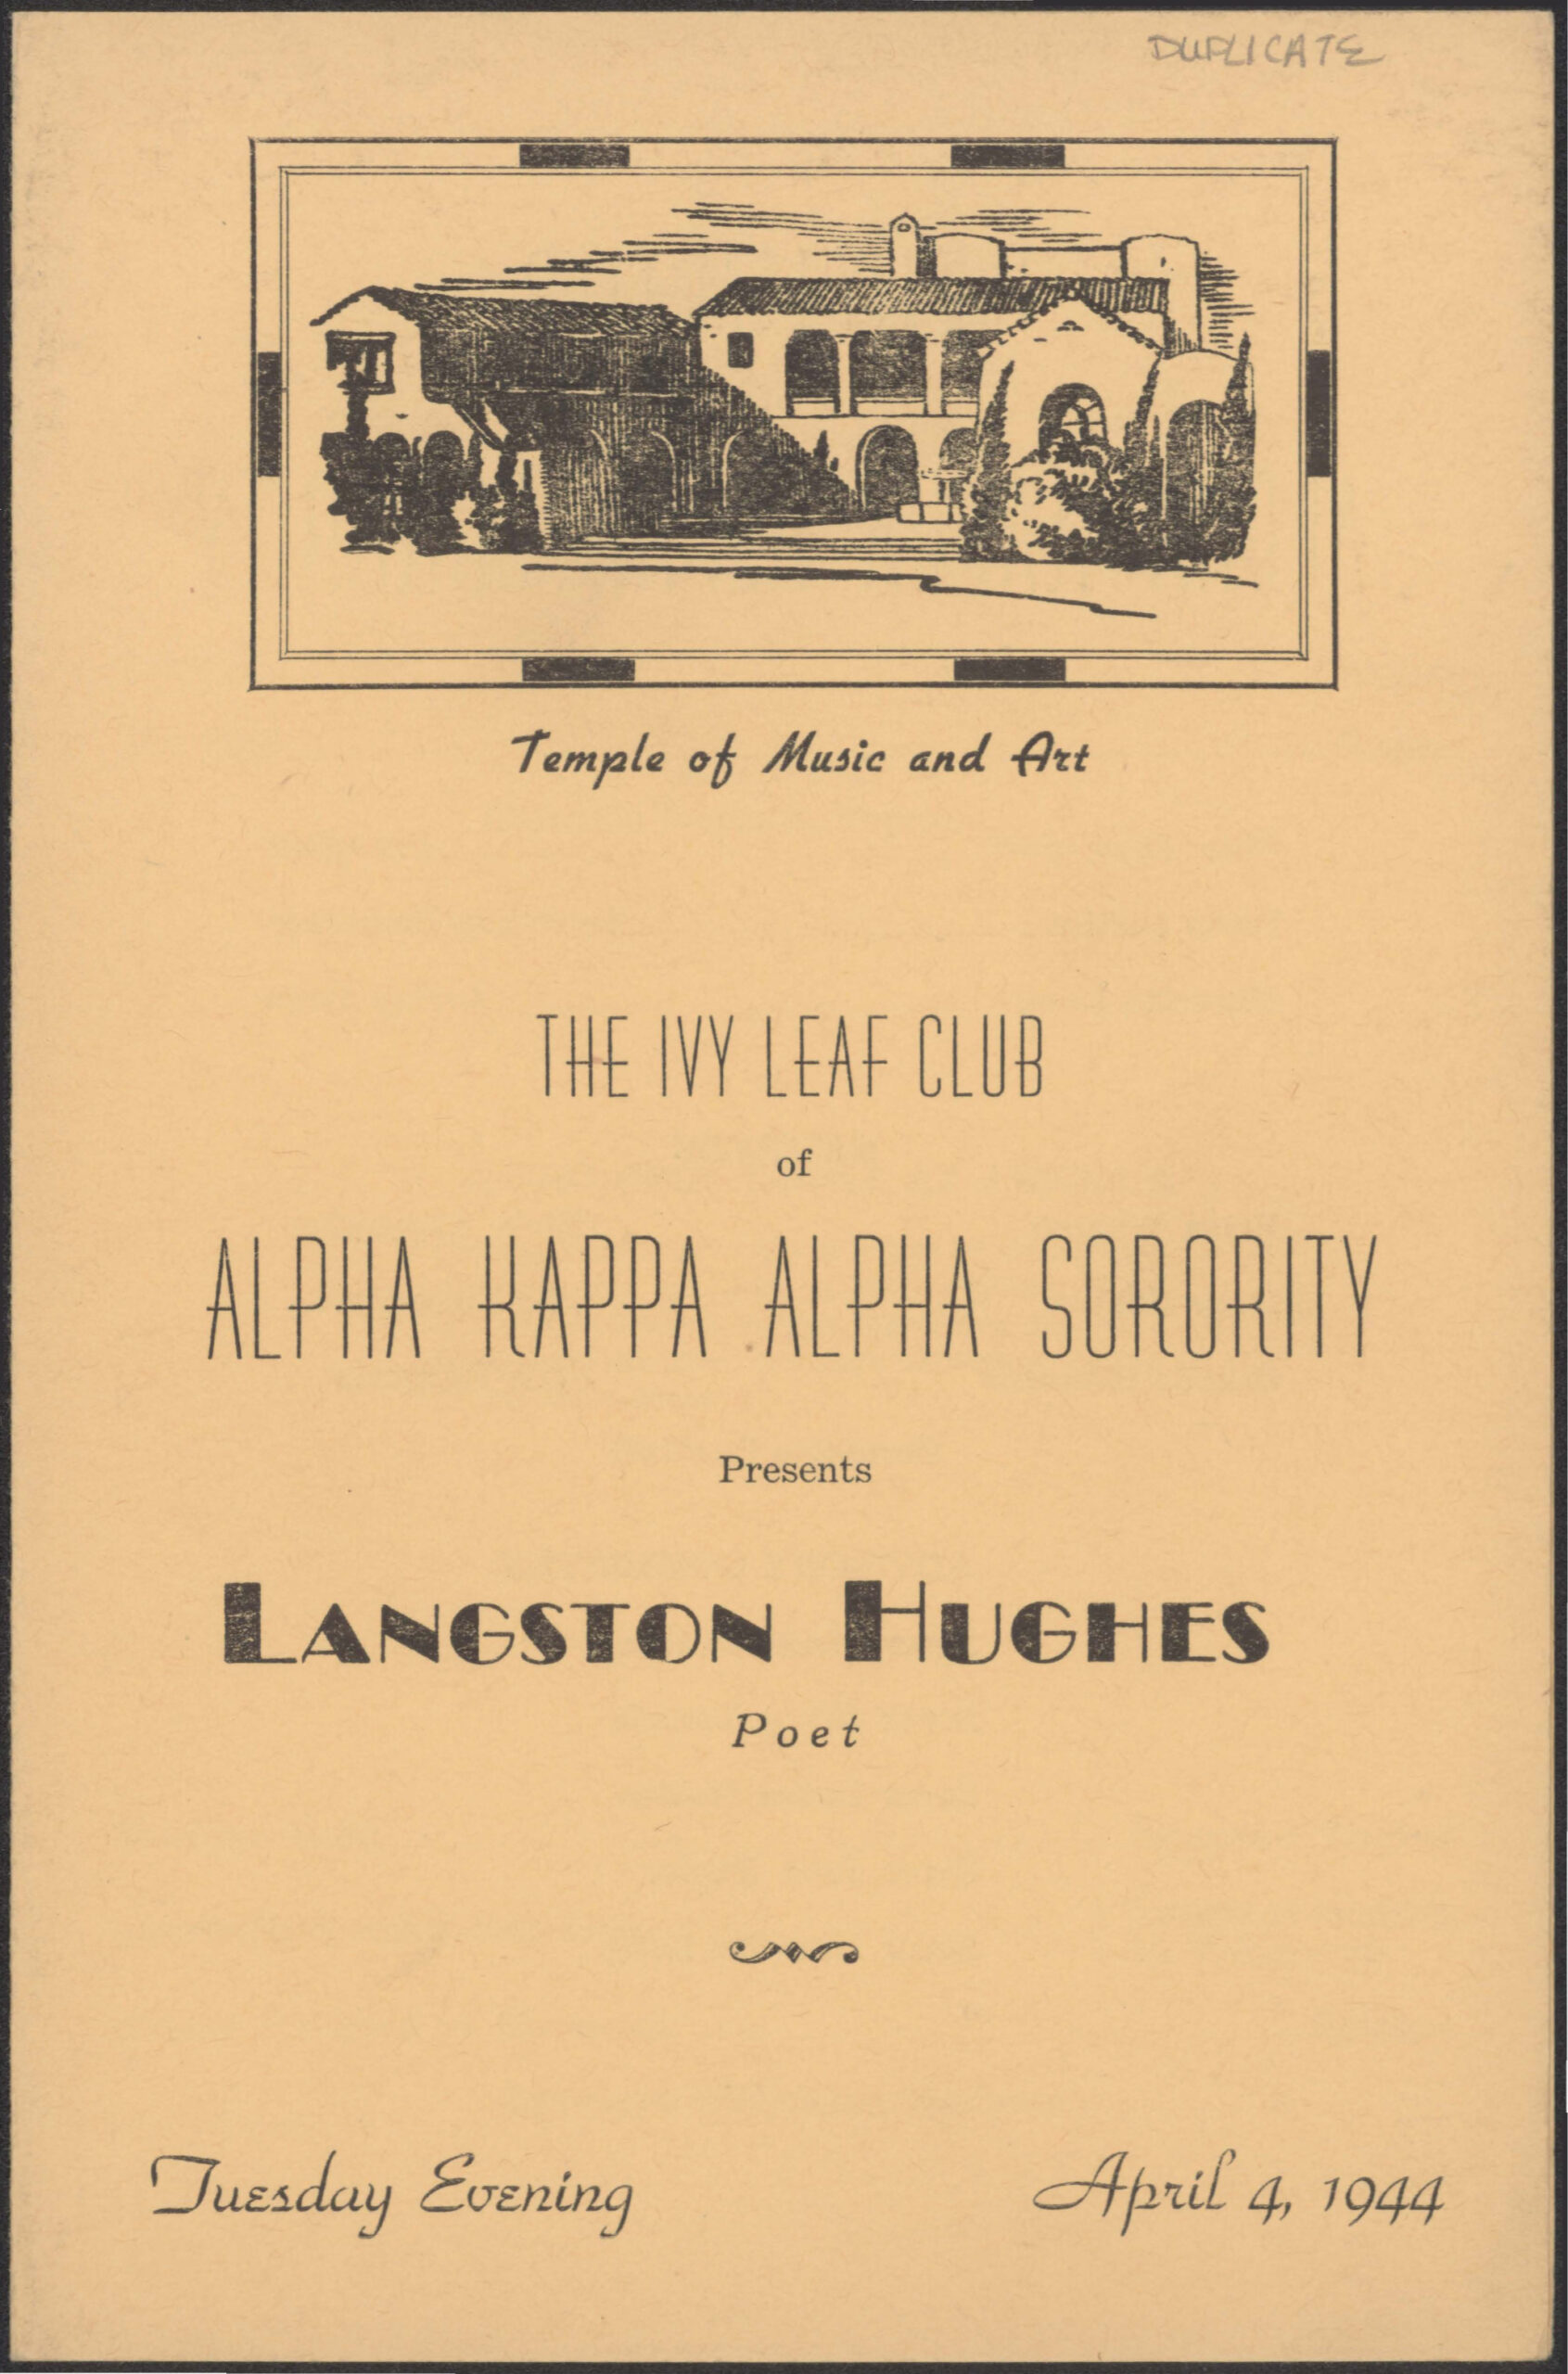 Alpha Kappa Alpha Sorority, “The Ivy Leaf Club of Alpha Kappa Alpha Sorority Presents Langston Hughes,” April 4, 1944, Langston Hughes ephemera collection, Special Collections, University of Delaware